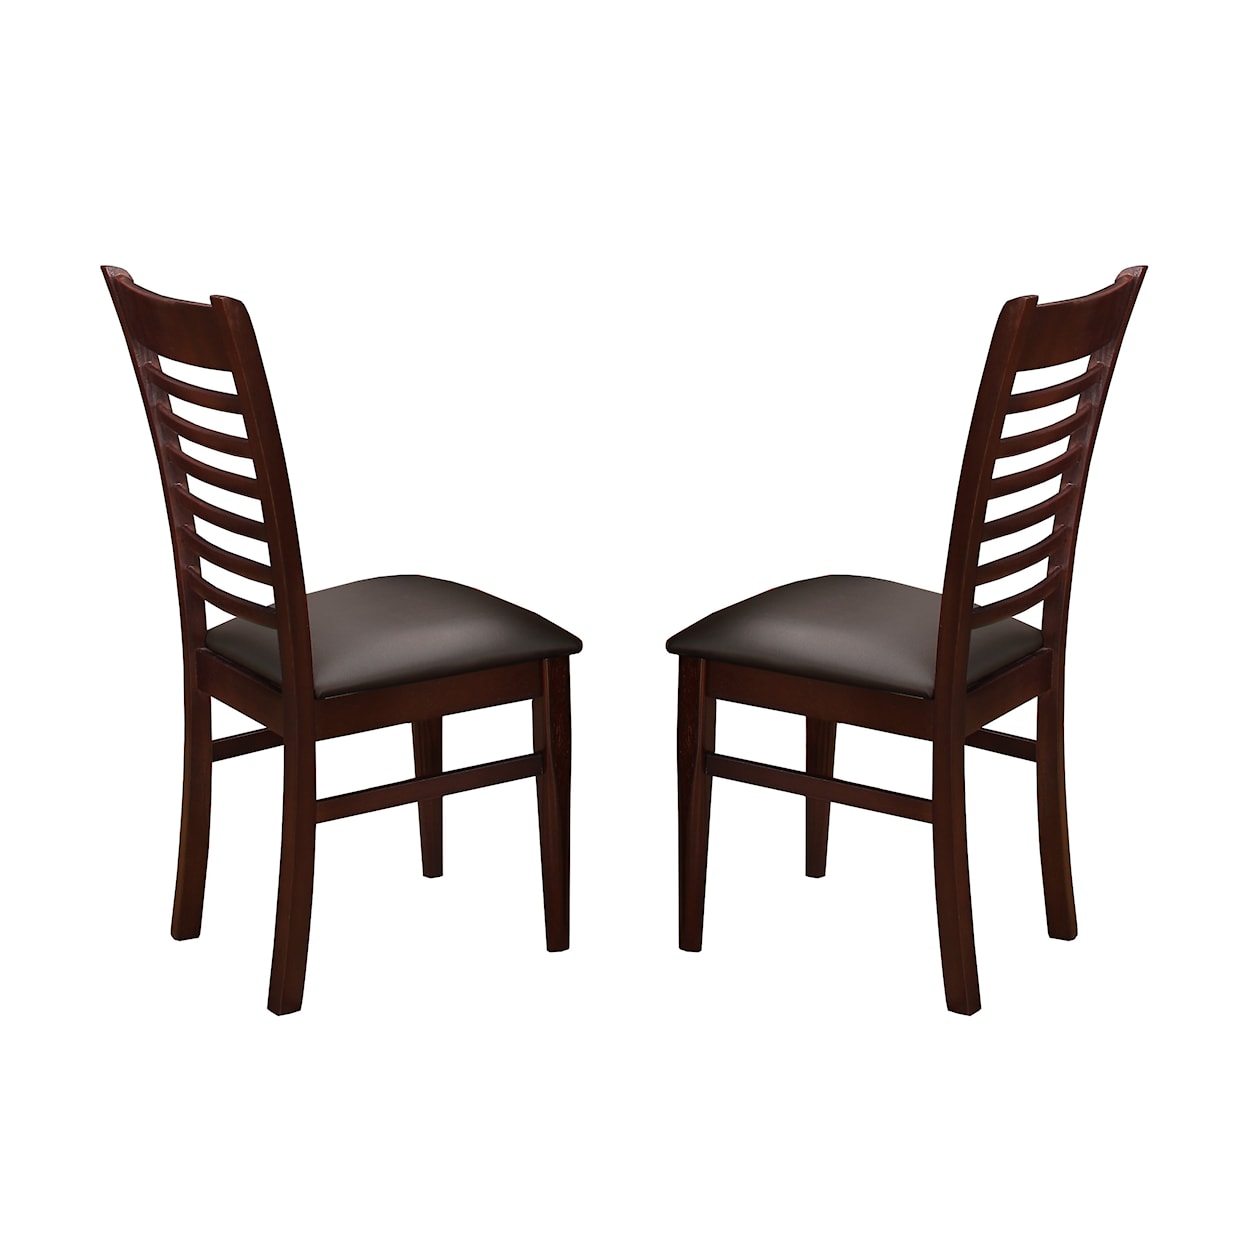 Milton Greens Stars Dining Room BRUCIE BROWN DINING CHAIR |